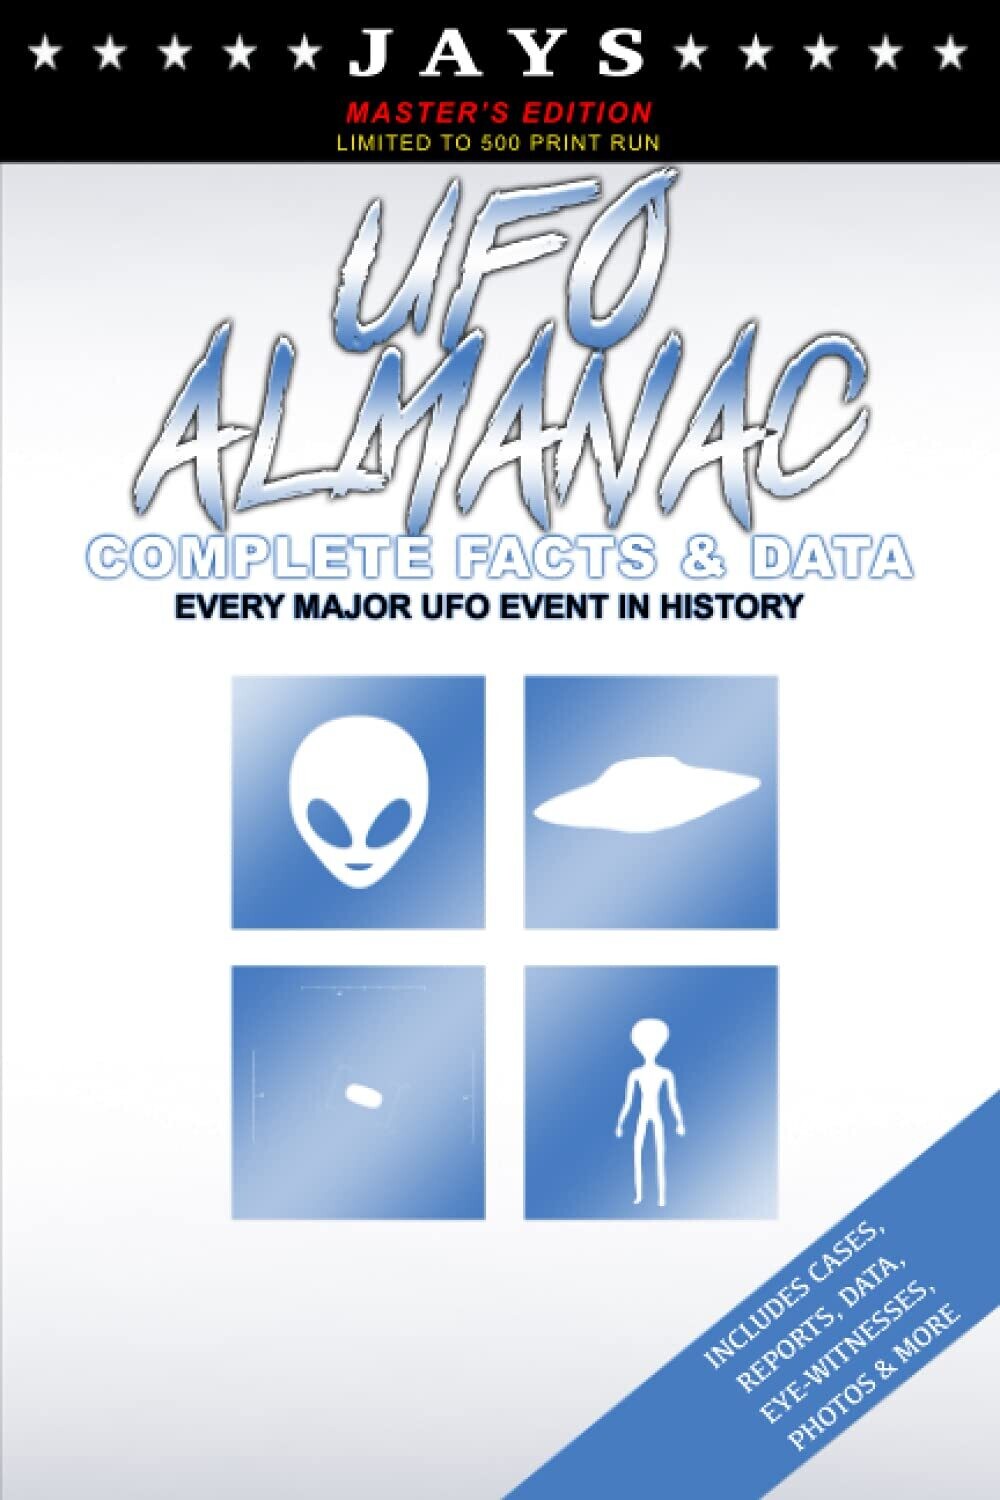 Jays UFO Almanac [#10 MASTER'S EDITION - LIMITED TO 500 PRINT RUN] Complete Facts & Data - Every Major UFO Case in History